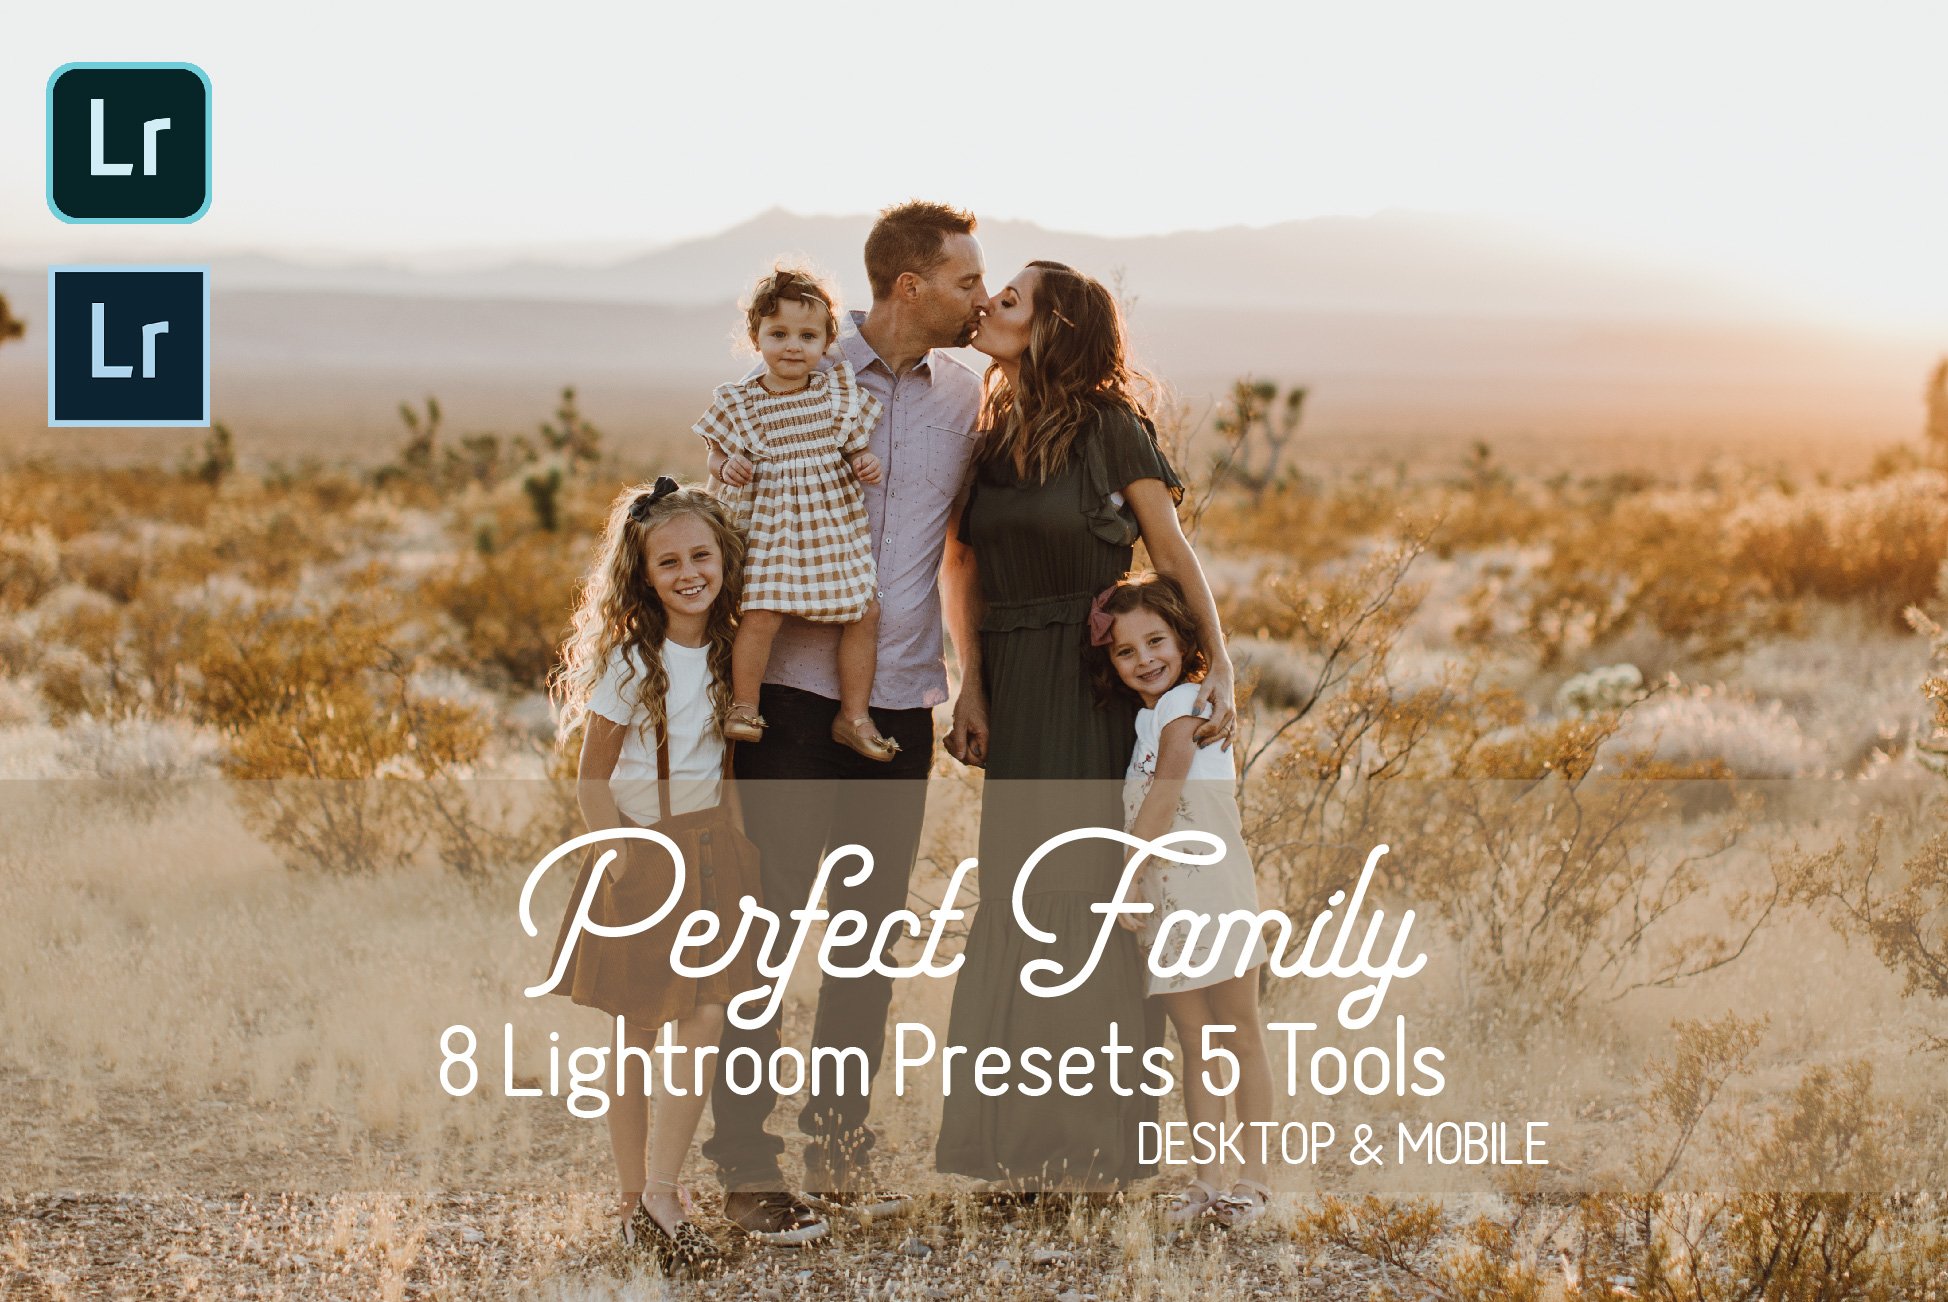 Perfect Family Lightroom Presetscover image.